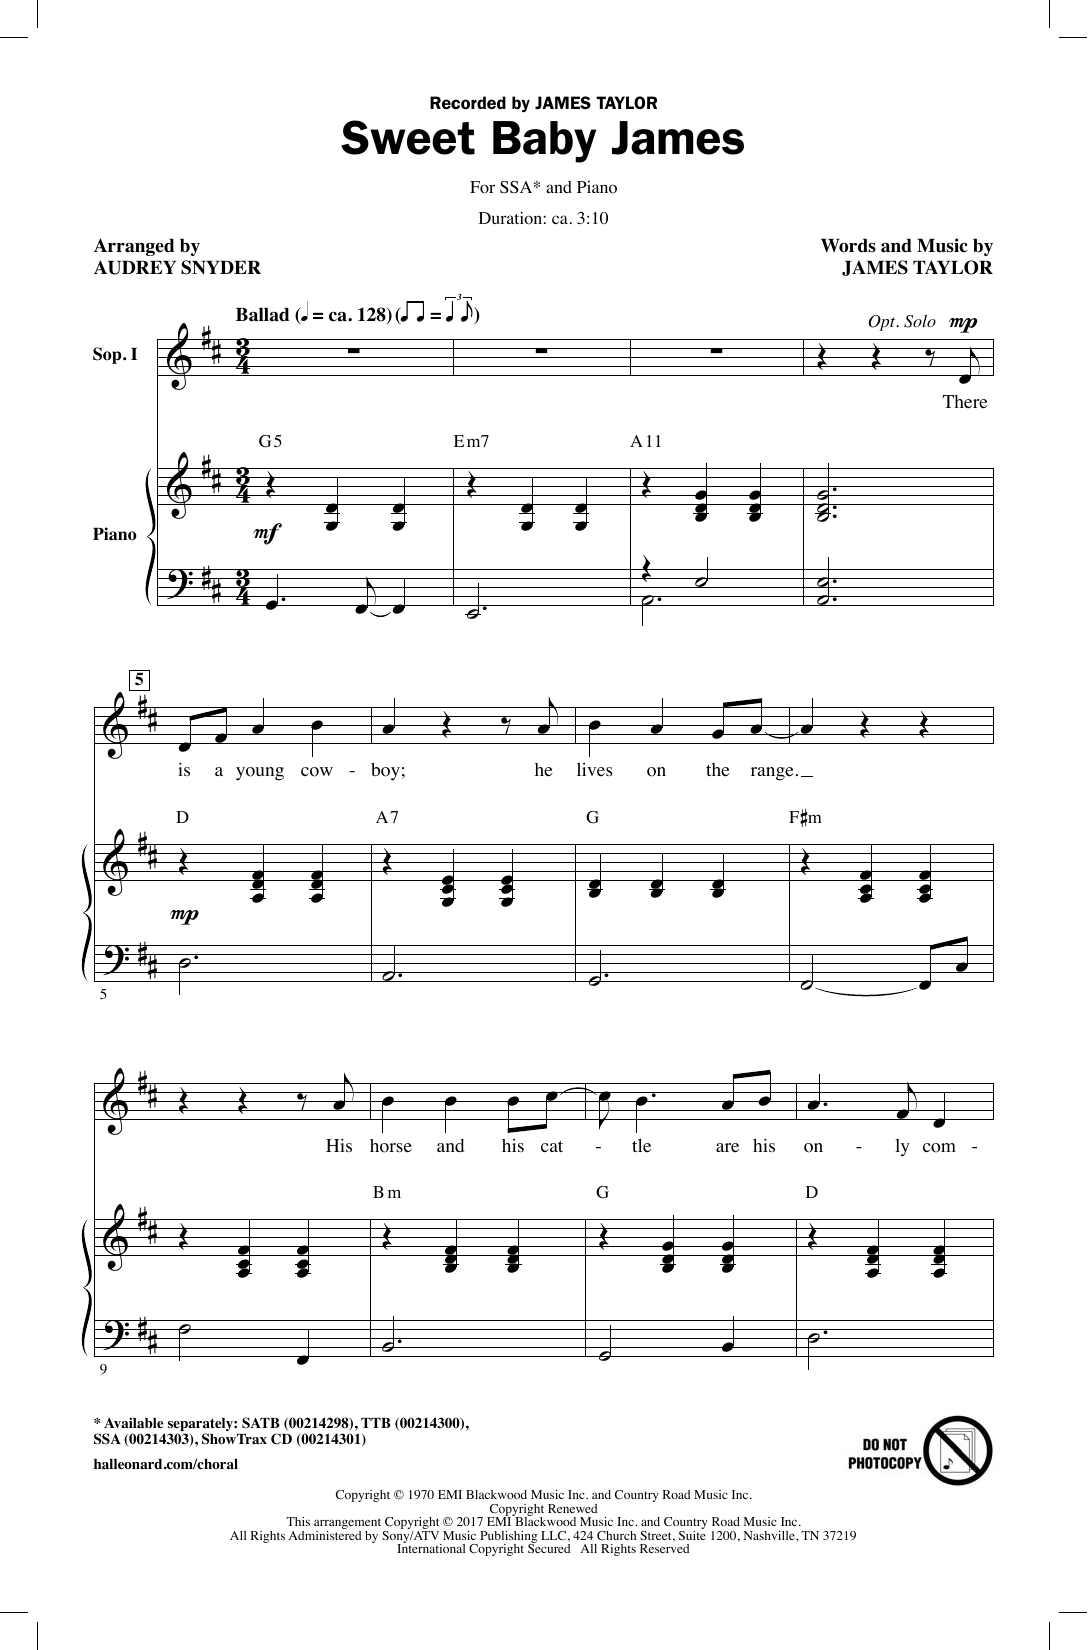 Download Audrey Snyder Sweet Baby James Sheet Music